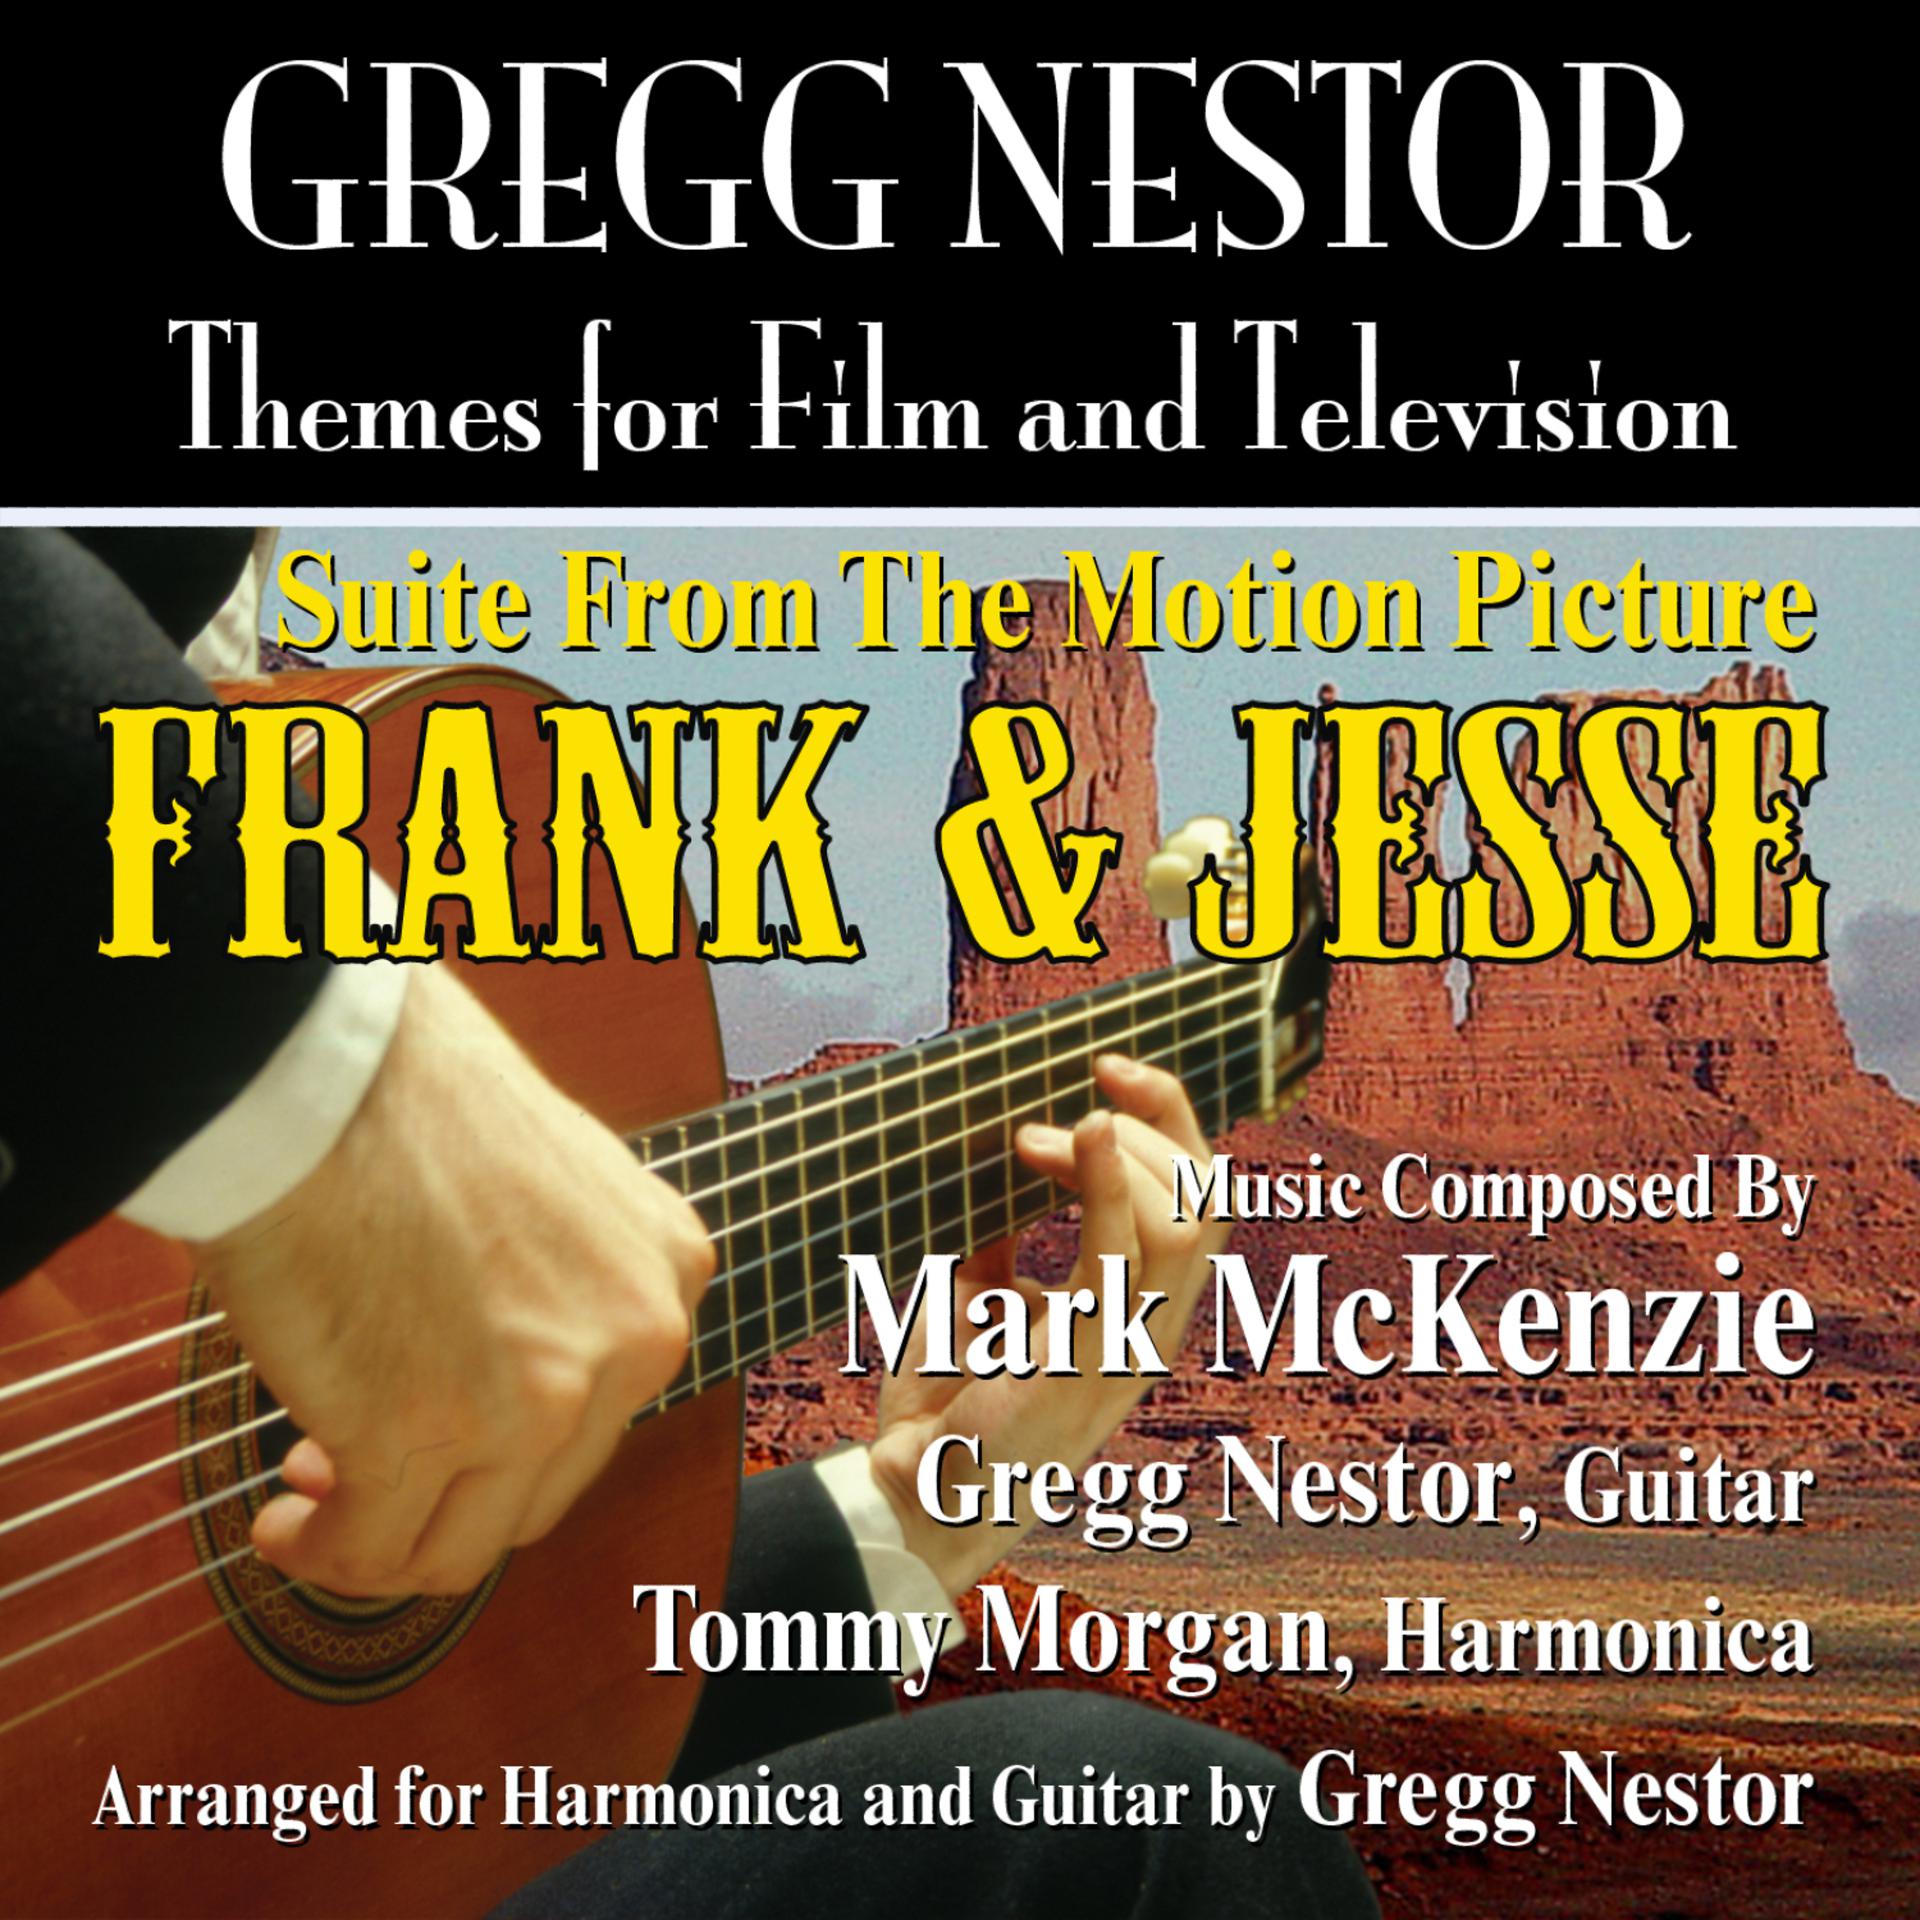 Постер альбома "Frank and Jesse" Suite from the Motion Picture By Mark McKenzie